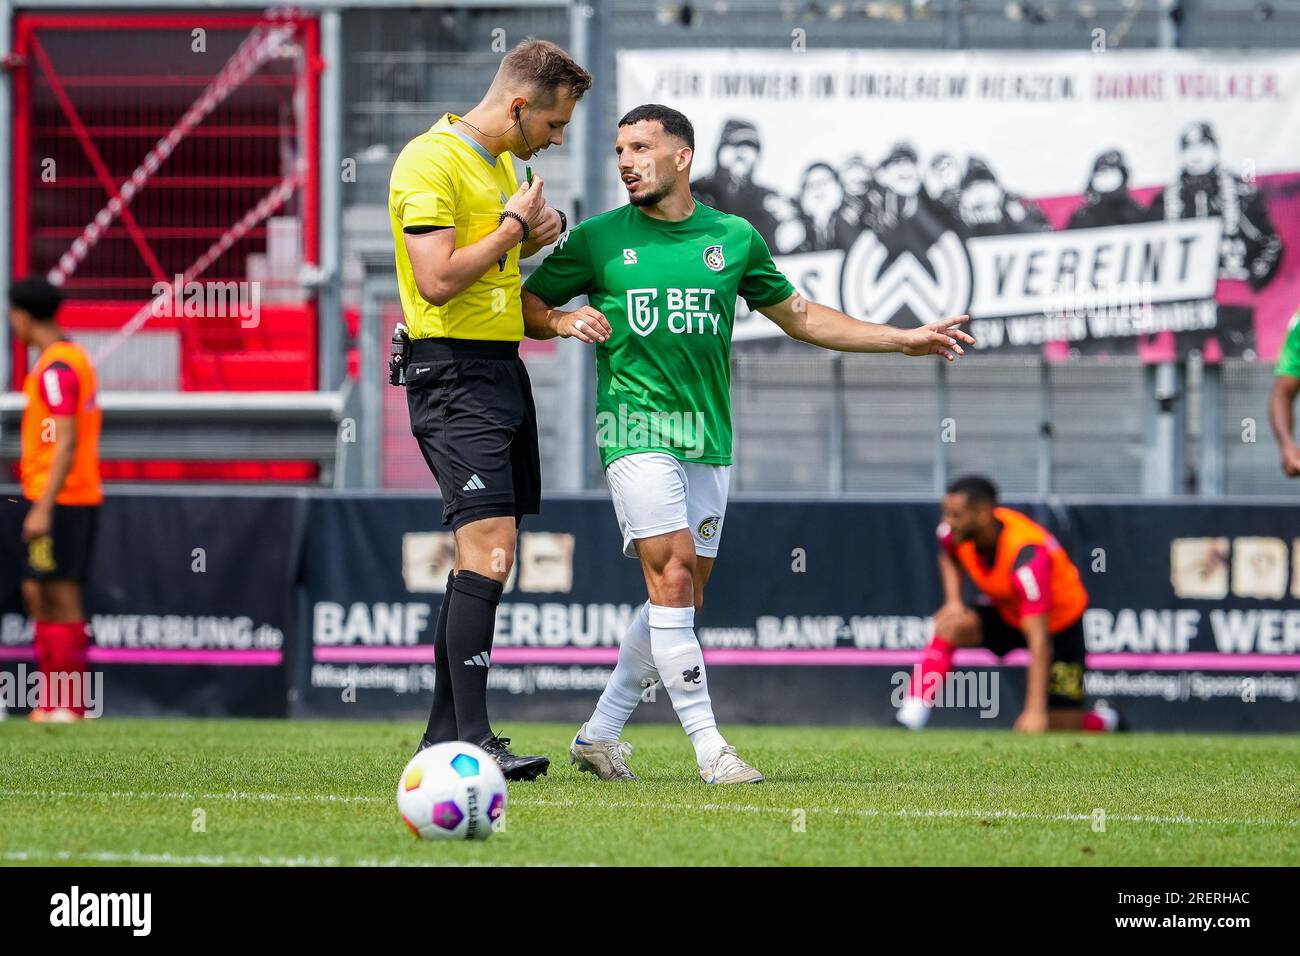 Taunusstein Wehen, Germany. 22nd July, 2023. TAUNUSSTEIN-WEHEN, GERMANY - JULY 22: Arianit Ferati of Fortuna Sittard during the Pre-Season Friendly match between SV Wehen Wiesbaden and Fortuna Sittard at the BRITA-Arena on July 22, 2023 in Taunusstein-Wehen, Germany (Photo by Orange Pictures) Credit: Orange Pics BV/Alamy Live News Stock Photo